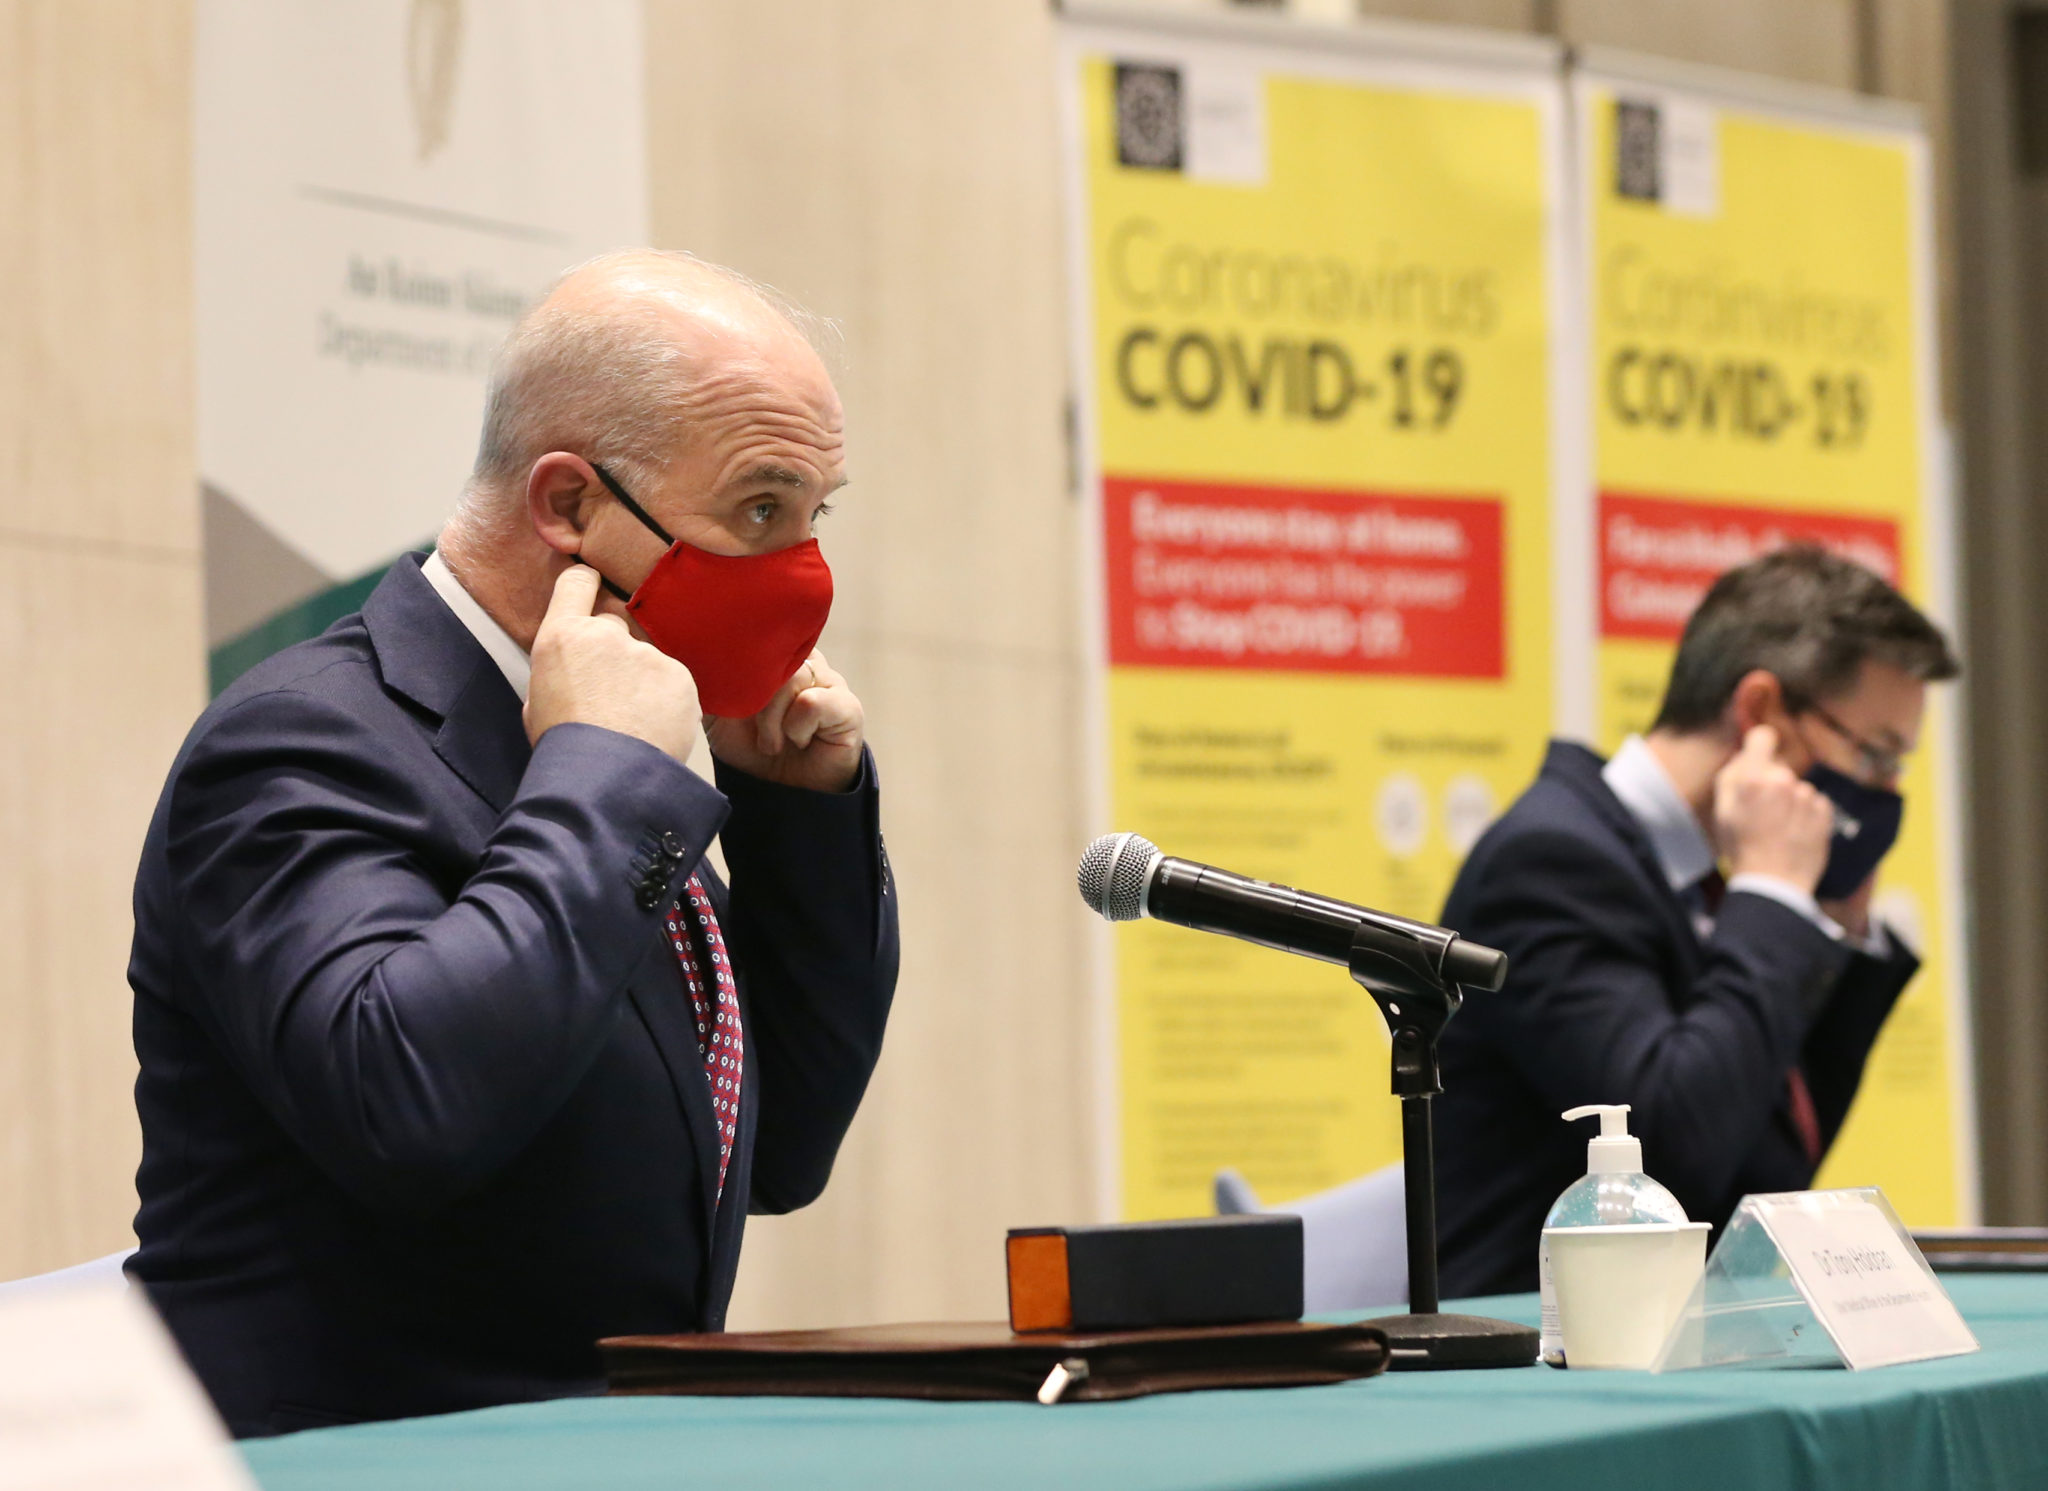 Dr Tony Holohan, Chief Medical Officer, and Dr Ronan Glynn, Deputy Chief Meidcal Officer, wearing face masks at a media briefing at the Department of Health in February 2021.